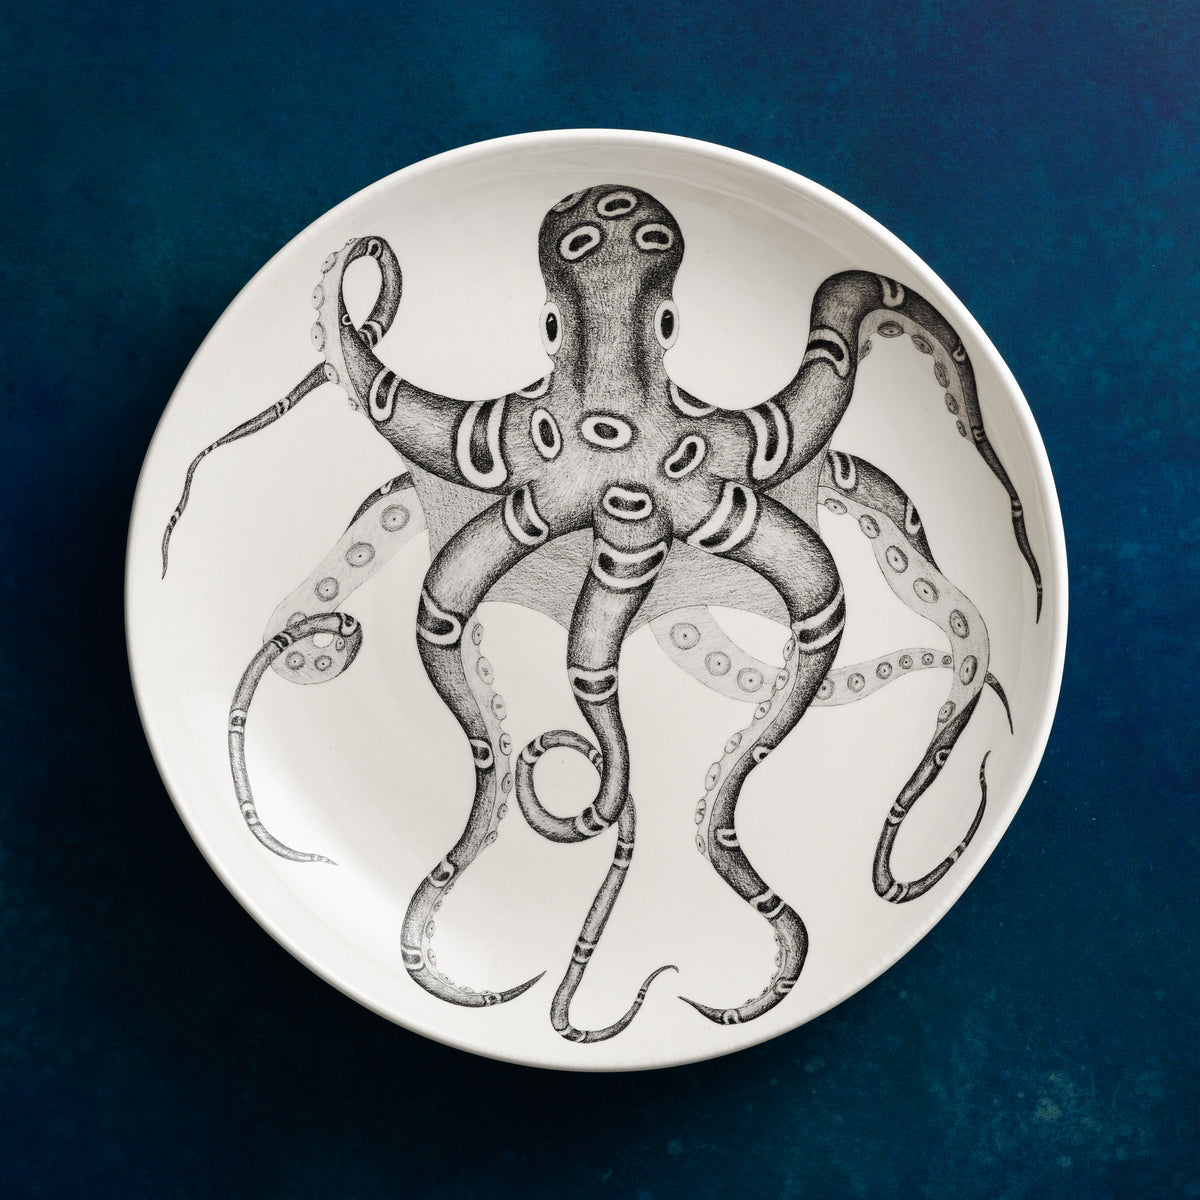 James Bond Octopussy Art Plate - Limited Edition - By Tom Rooth